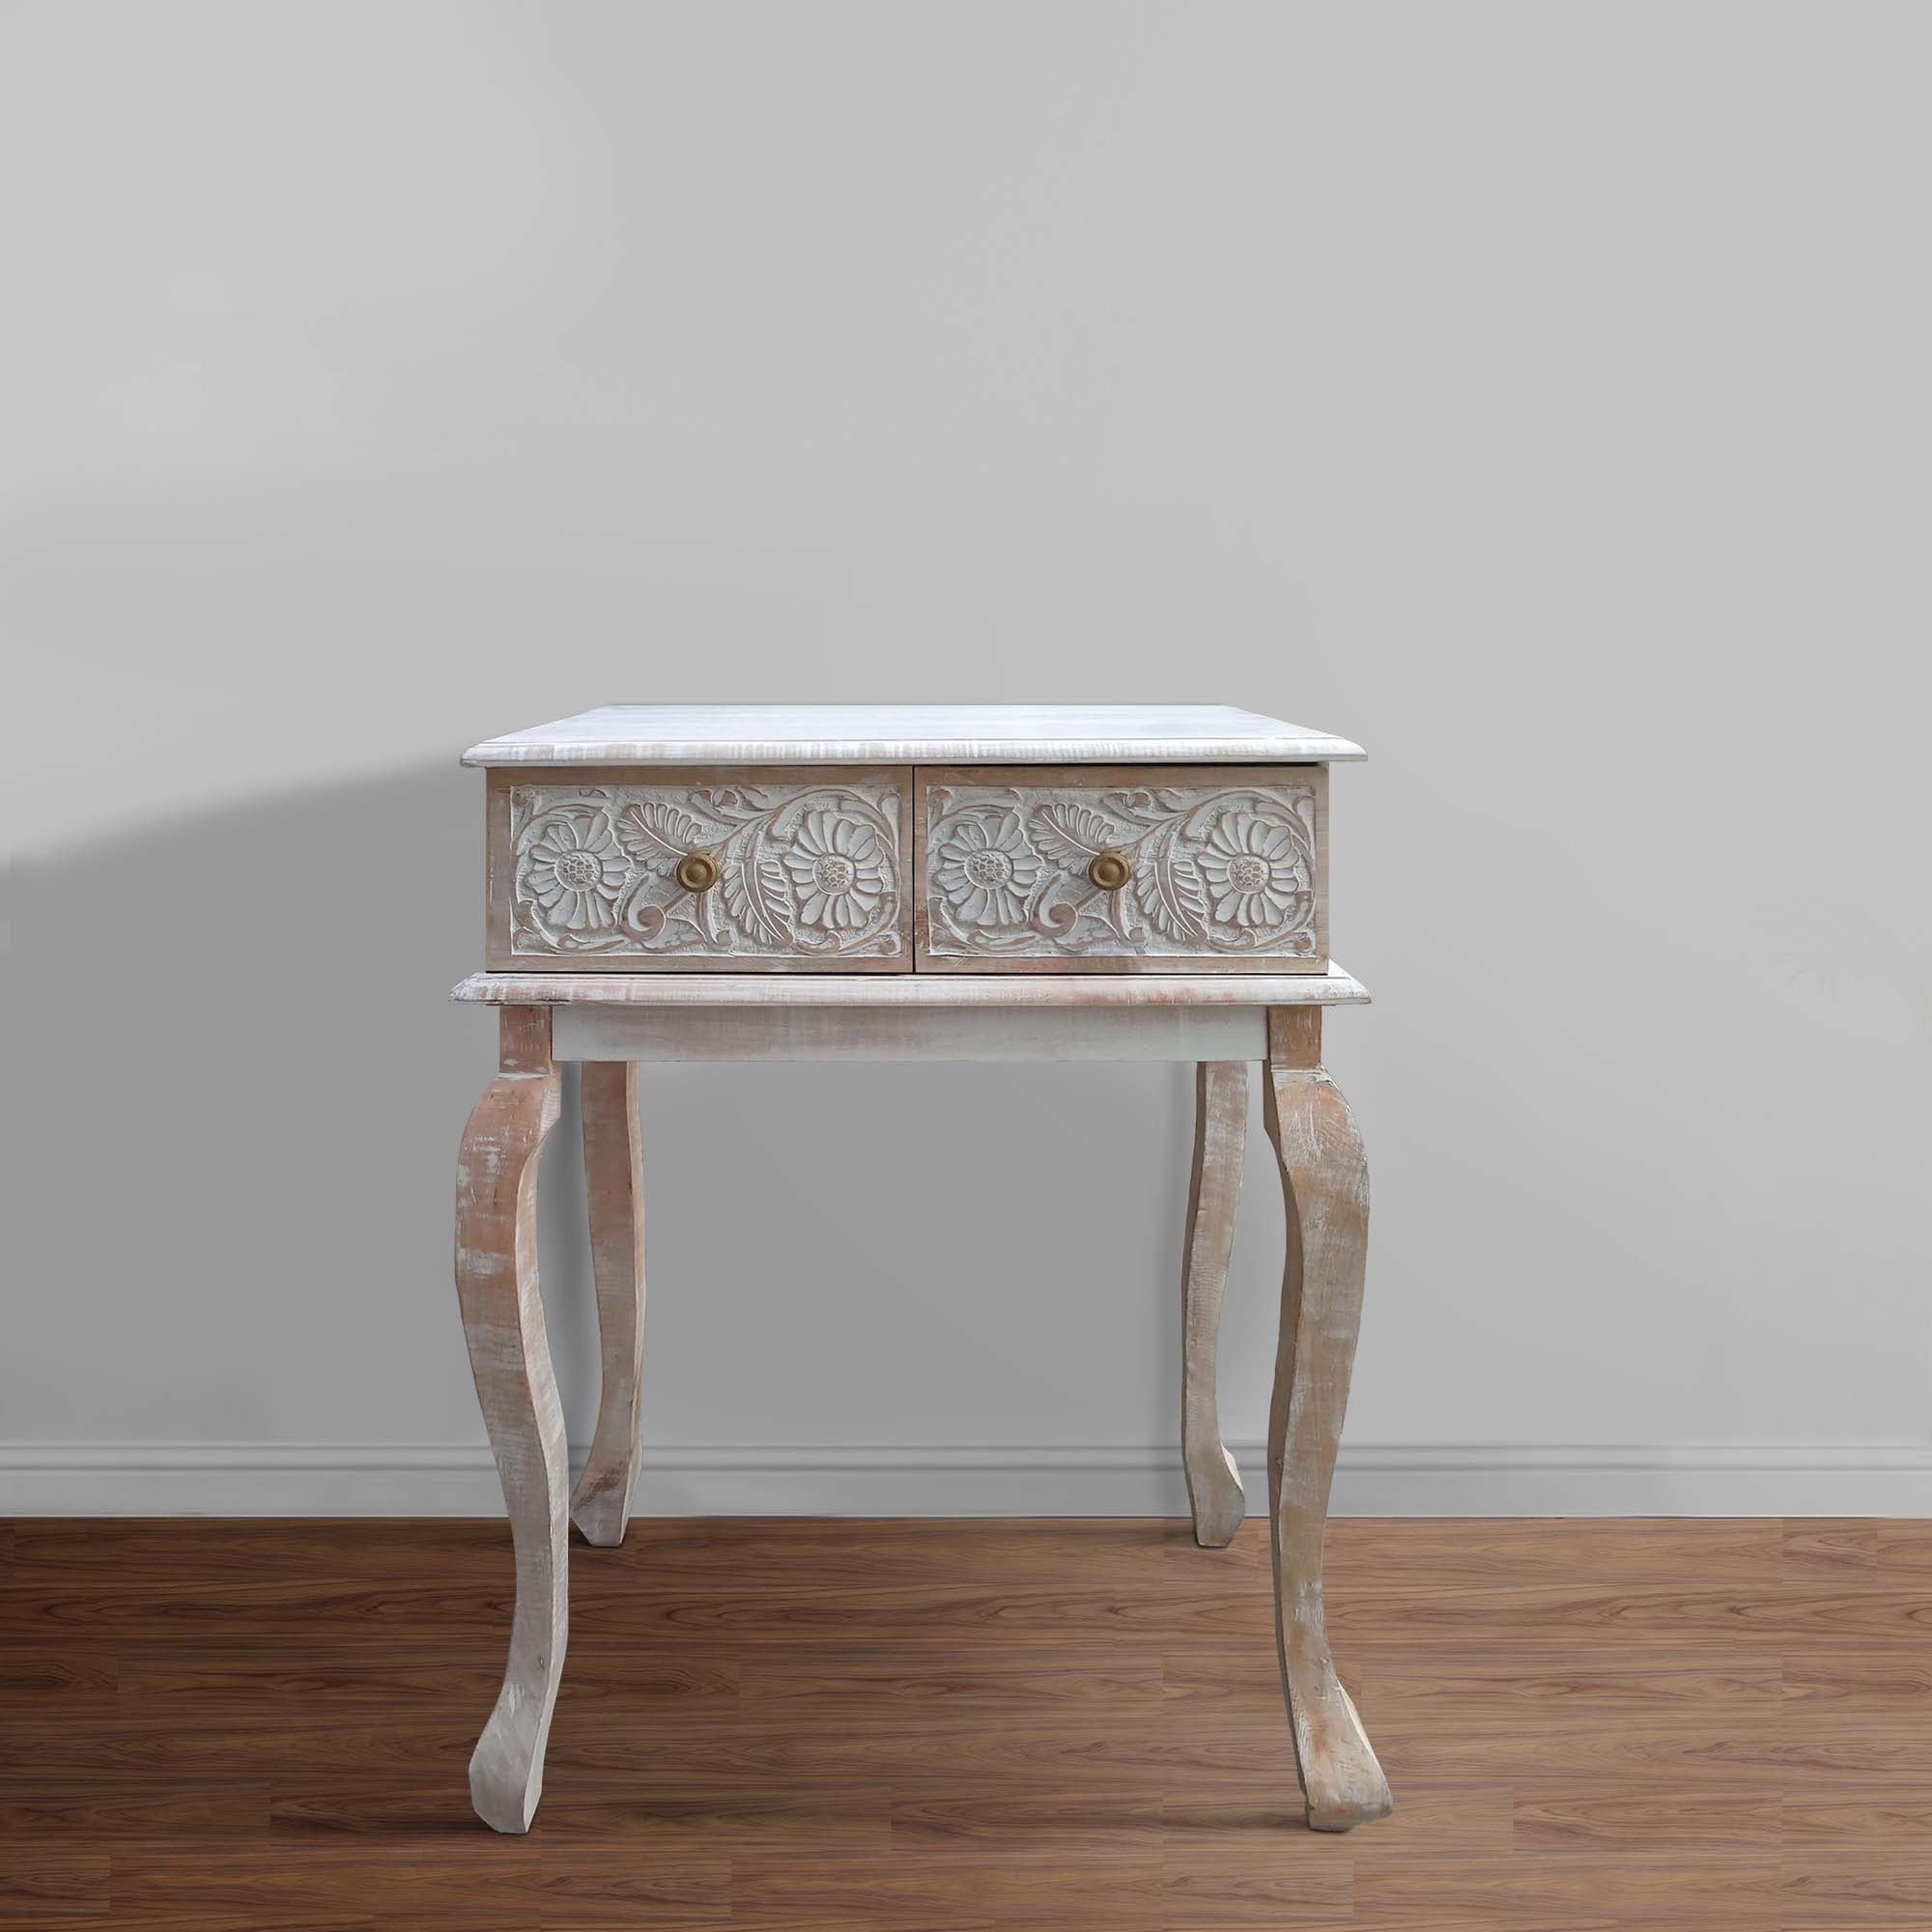 Upt-226283 2 Drawer Mango Wood Console Table With Floral Carved Front, Brown & White